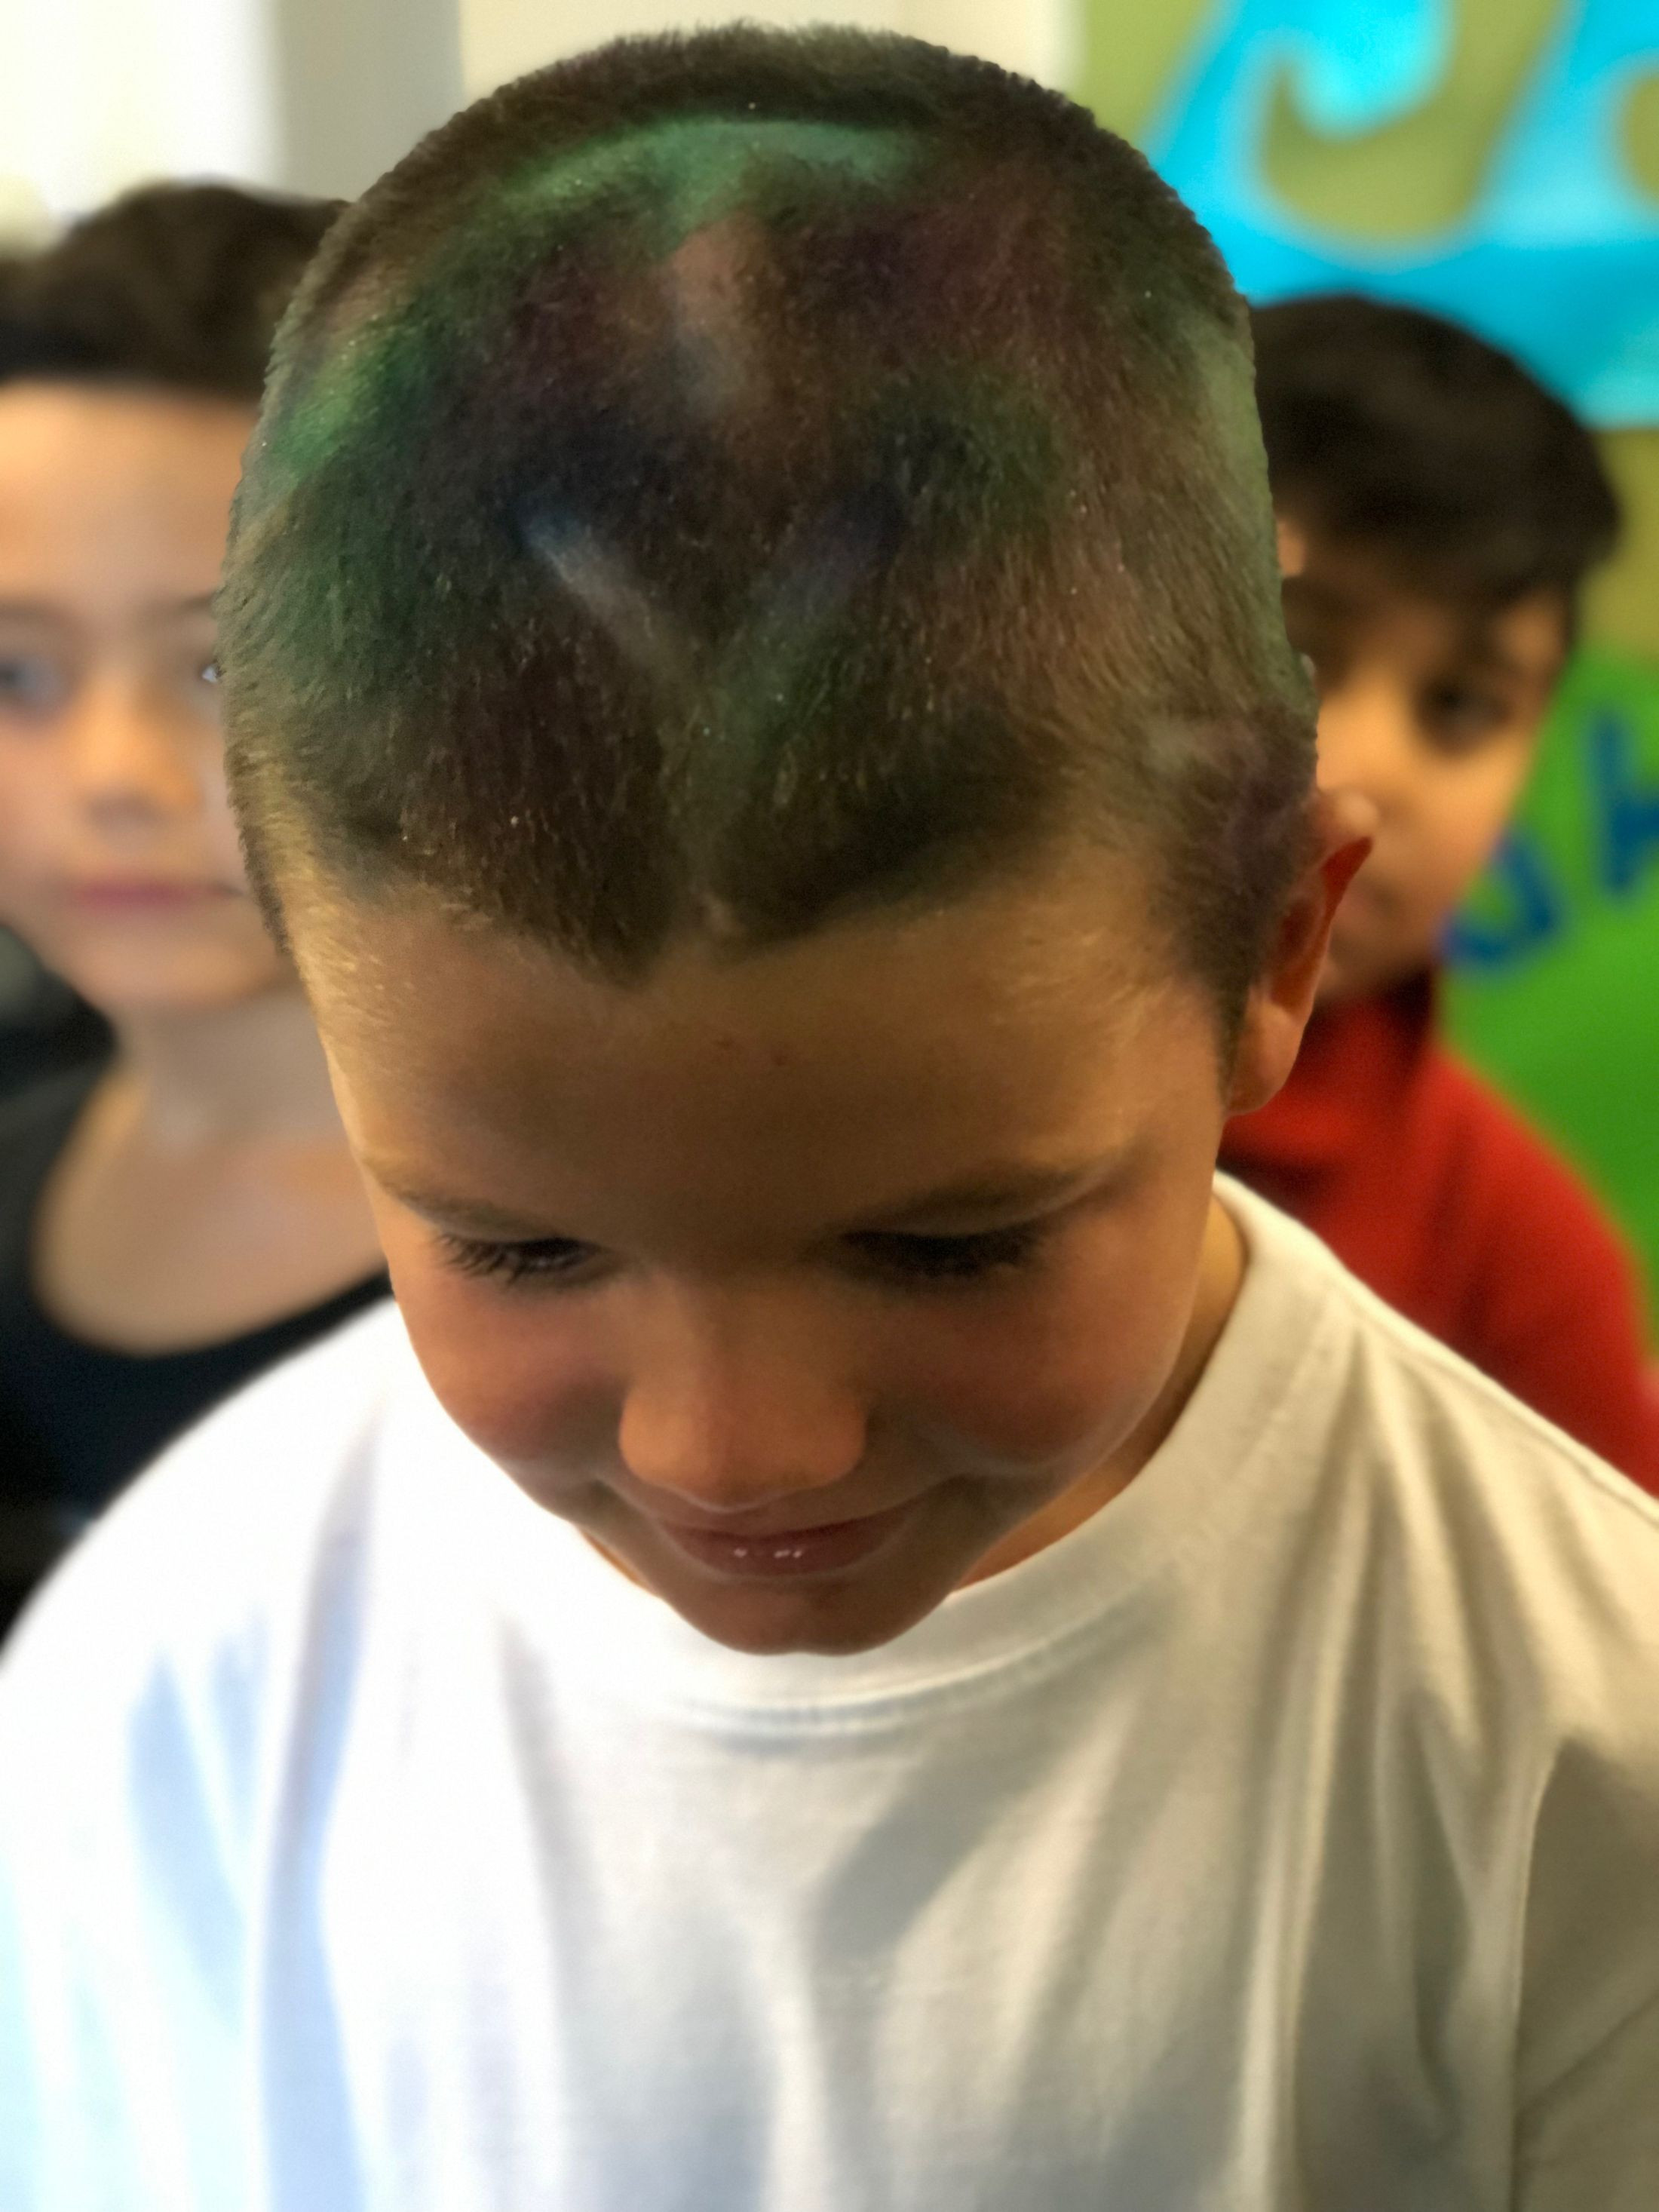 Crazy Hair Day 2019 - Gallery - Our Parents - Tahatai Coast School